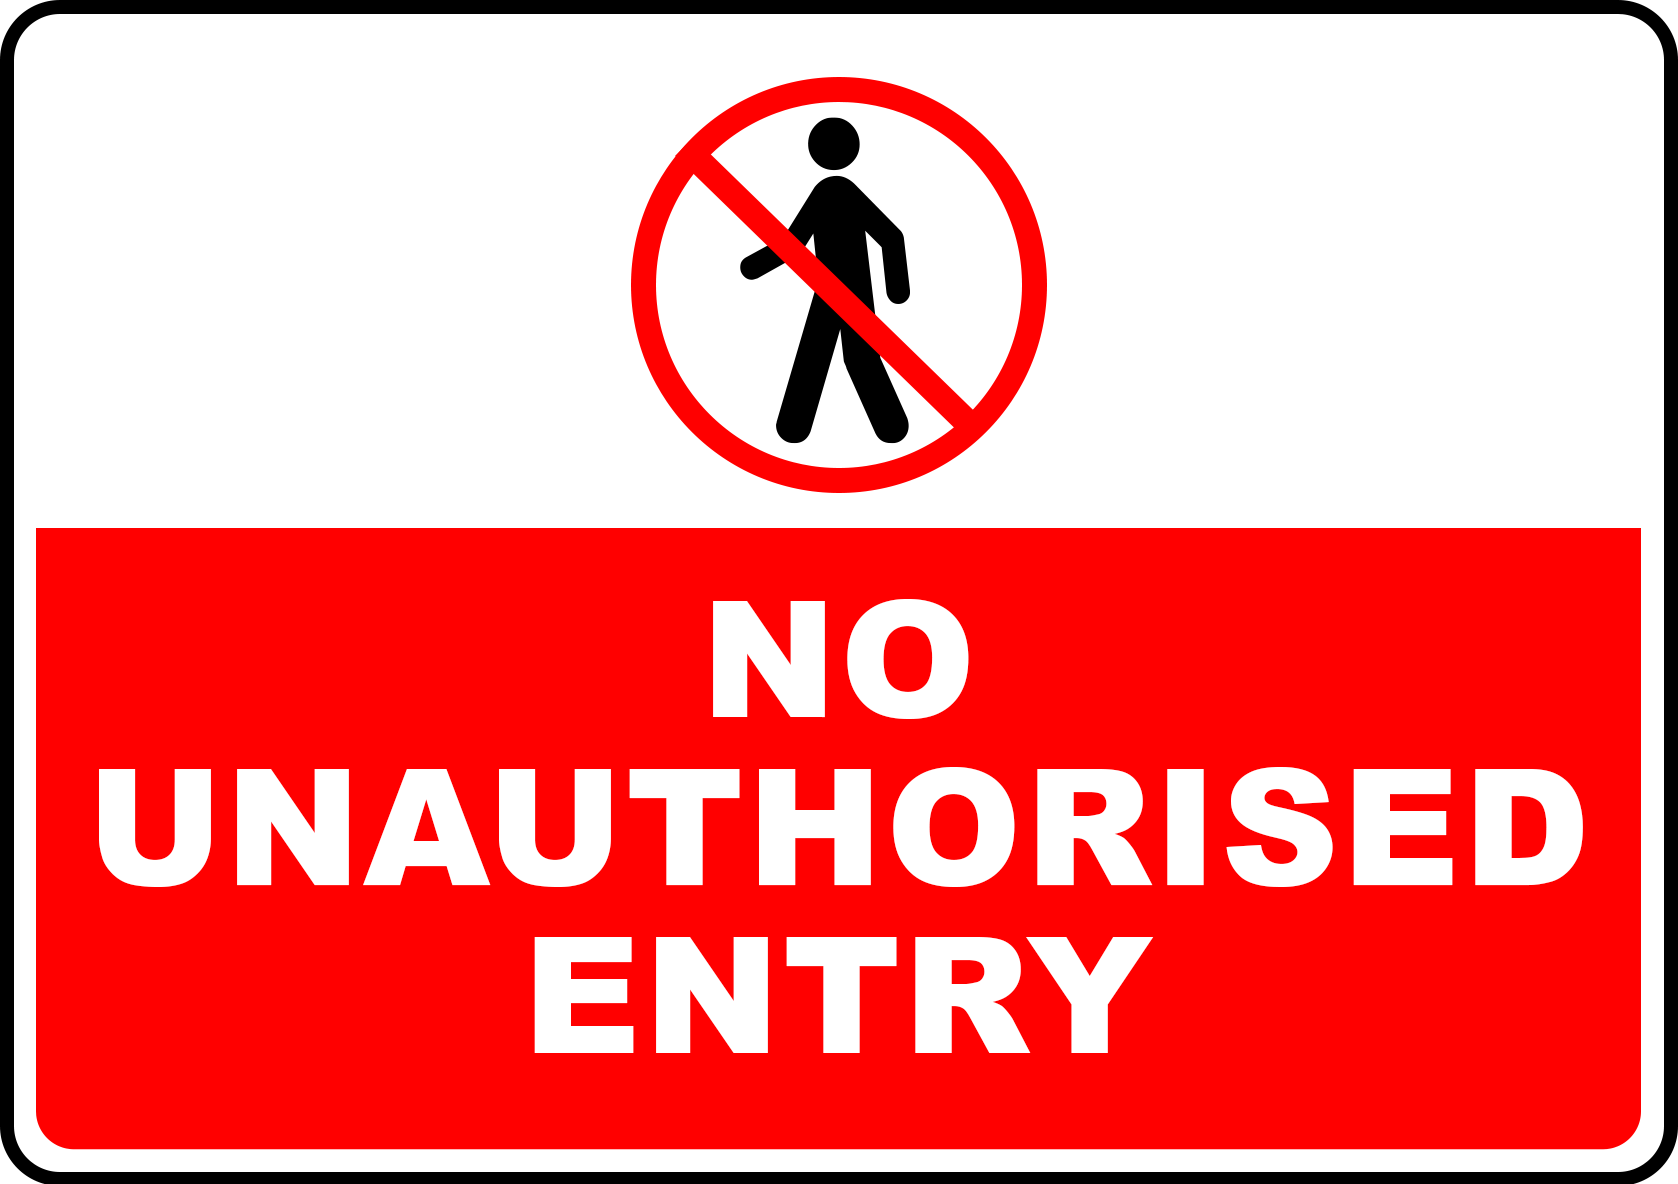 Unauthorized Sign Picture Download Free Image PNG Image